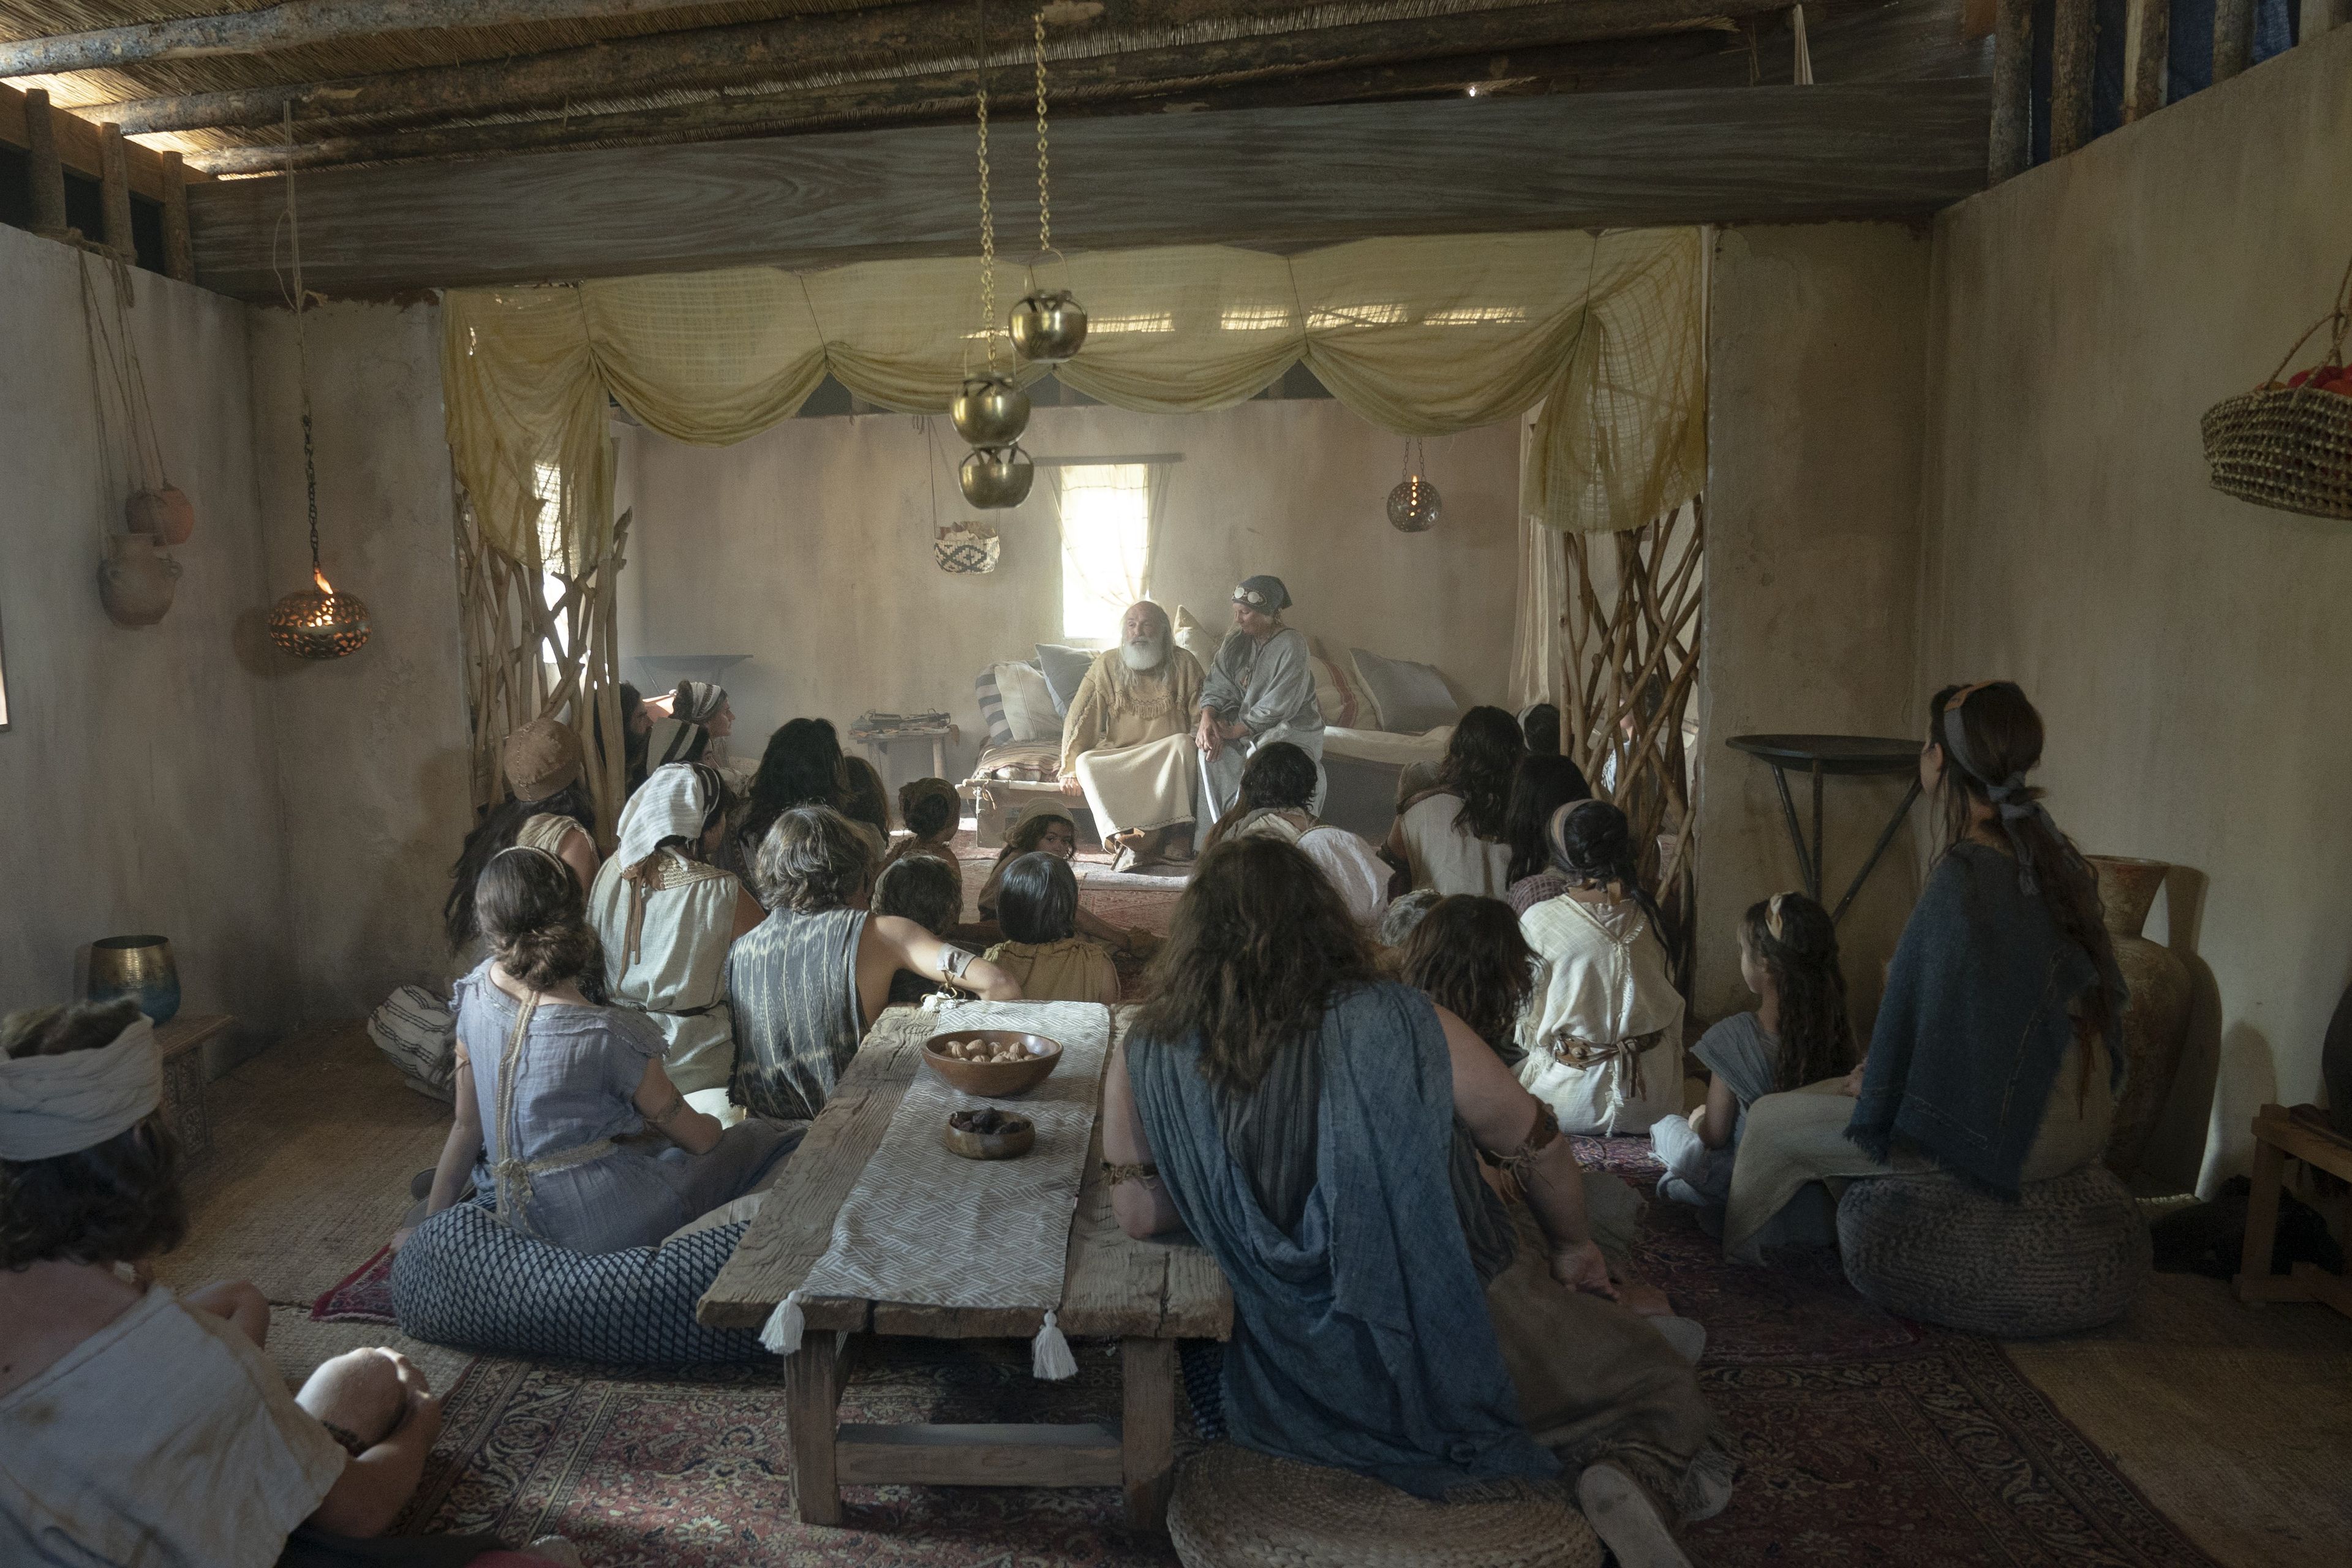 Lehi teaches his family in his home.